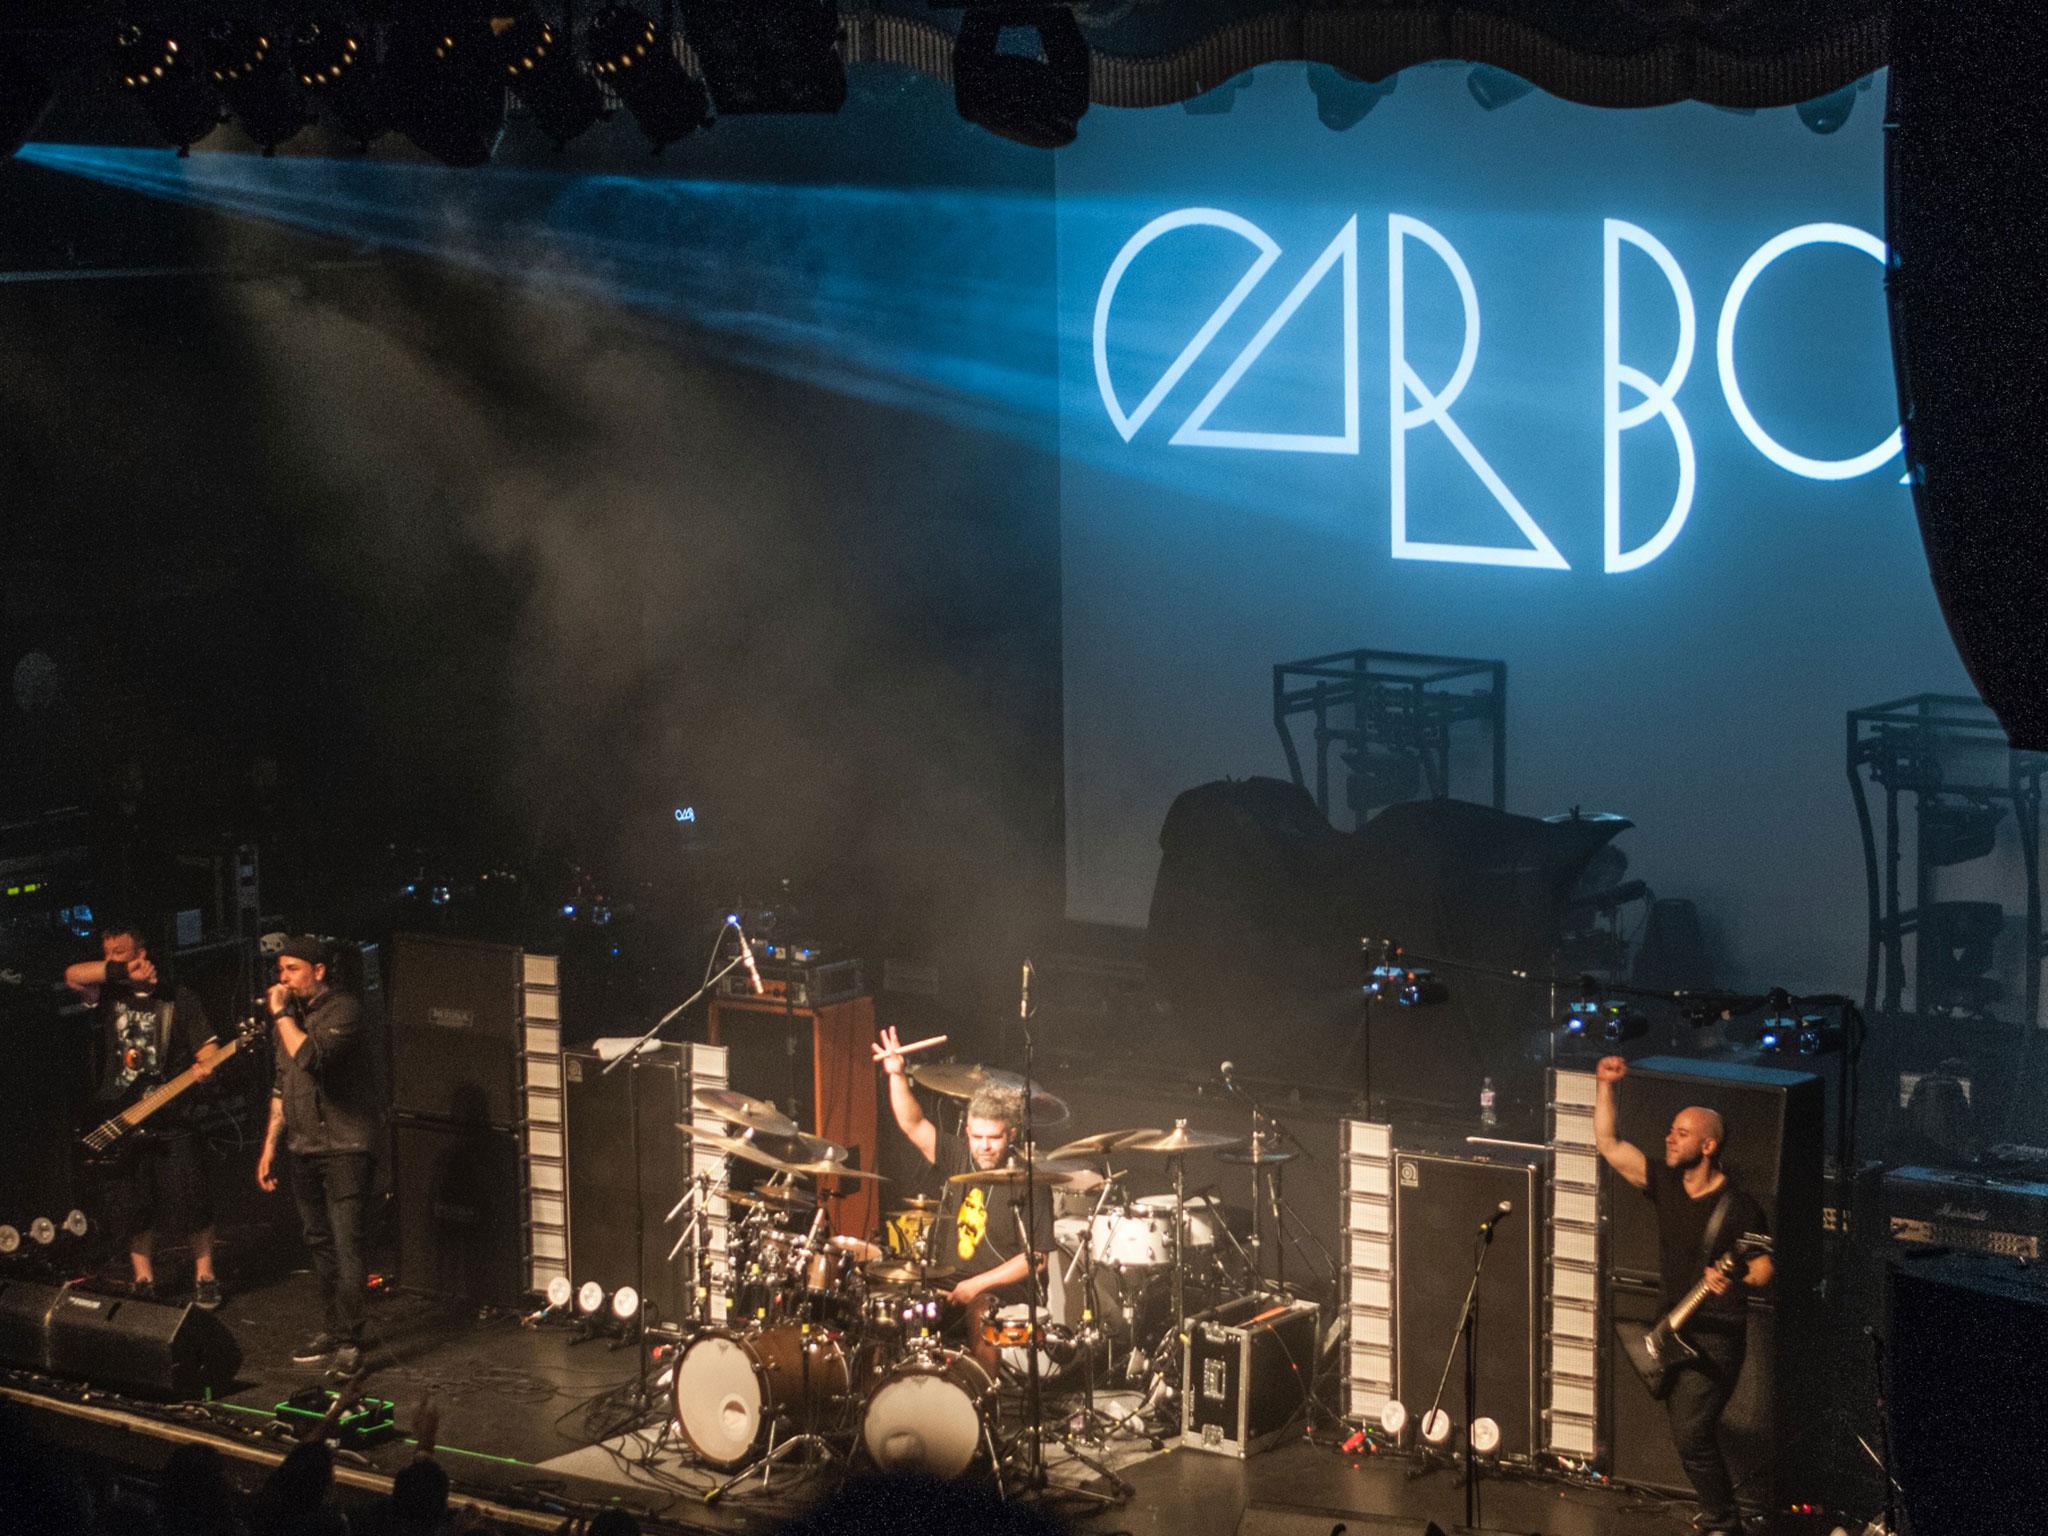 Car Bomb played a spellbinding opening set at the O2 Forum, London